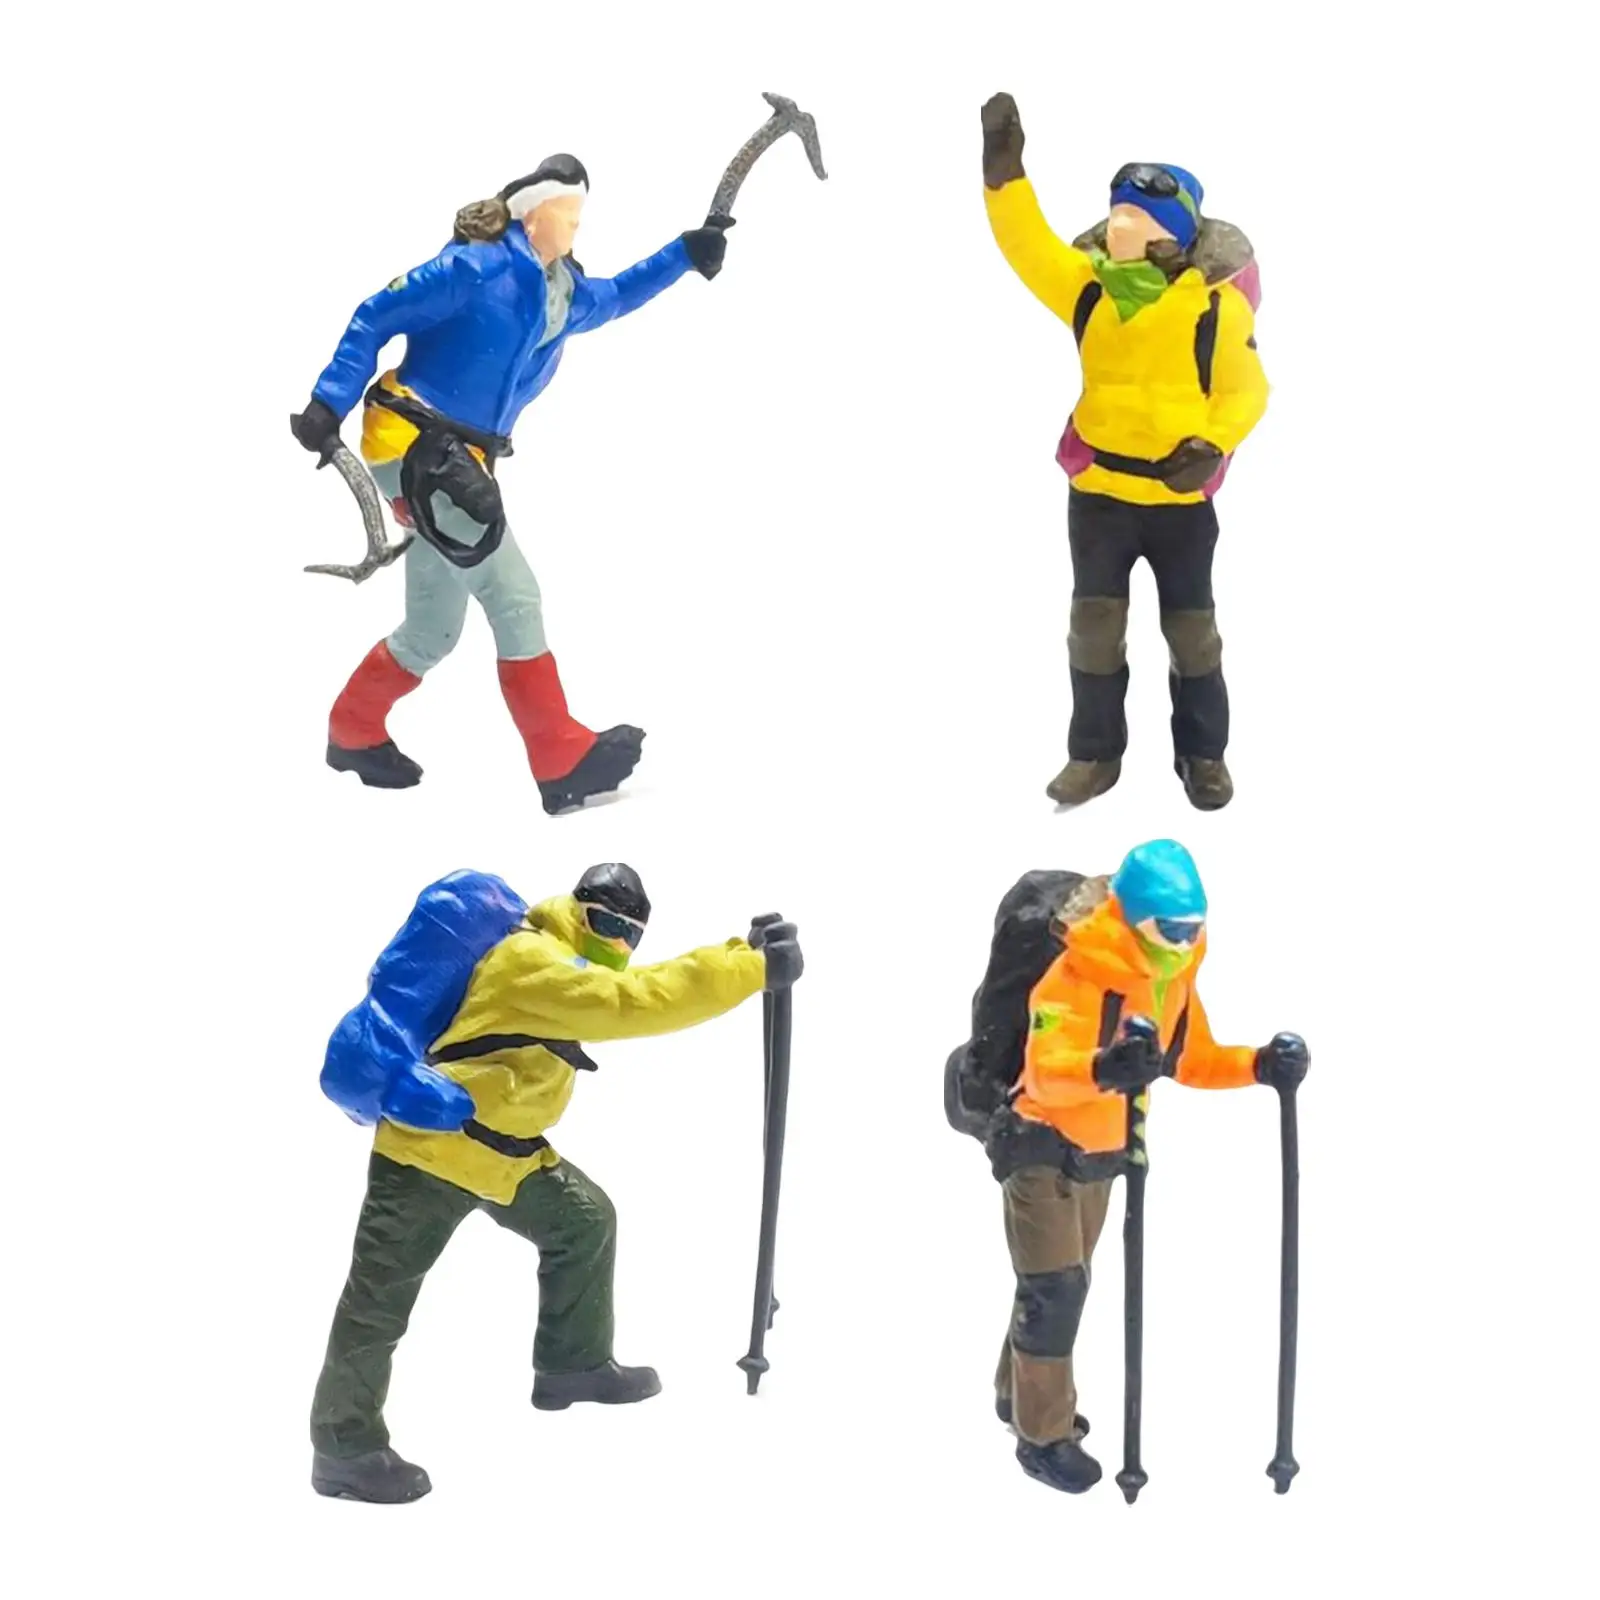 4Pcs Resin Miniature Scene People Dollhouse People Tiny People Toys Role Play Figure Painted Figures for Game Activity Role Play